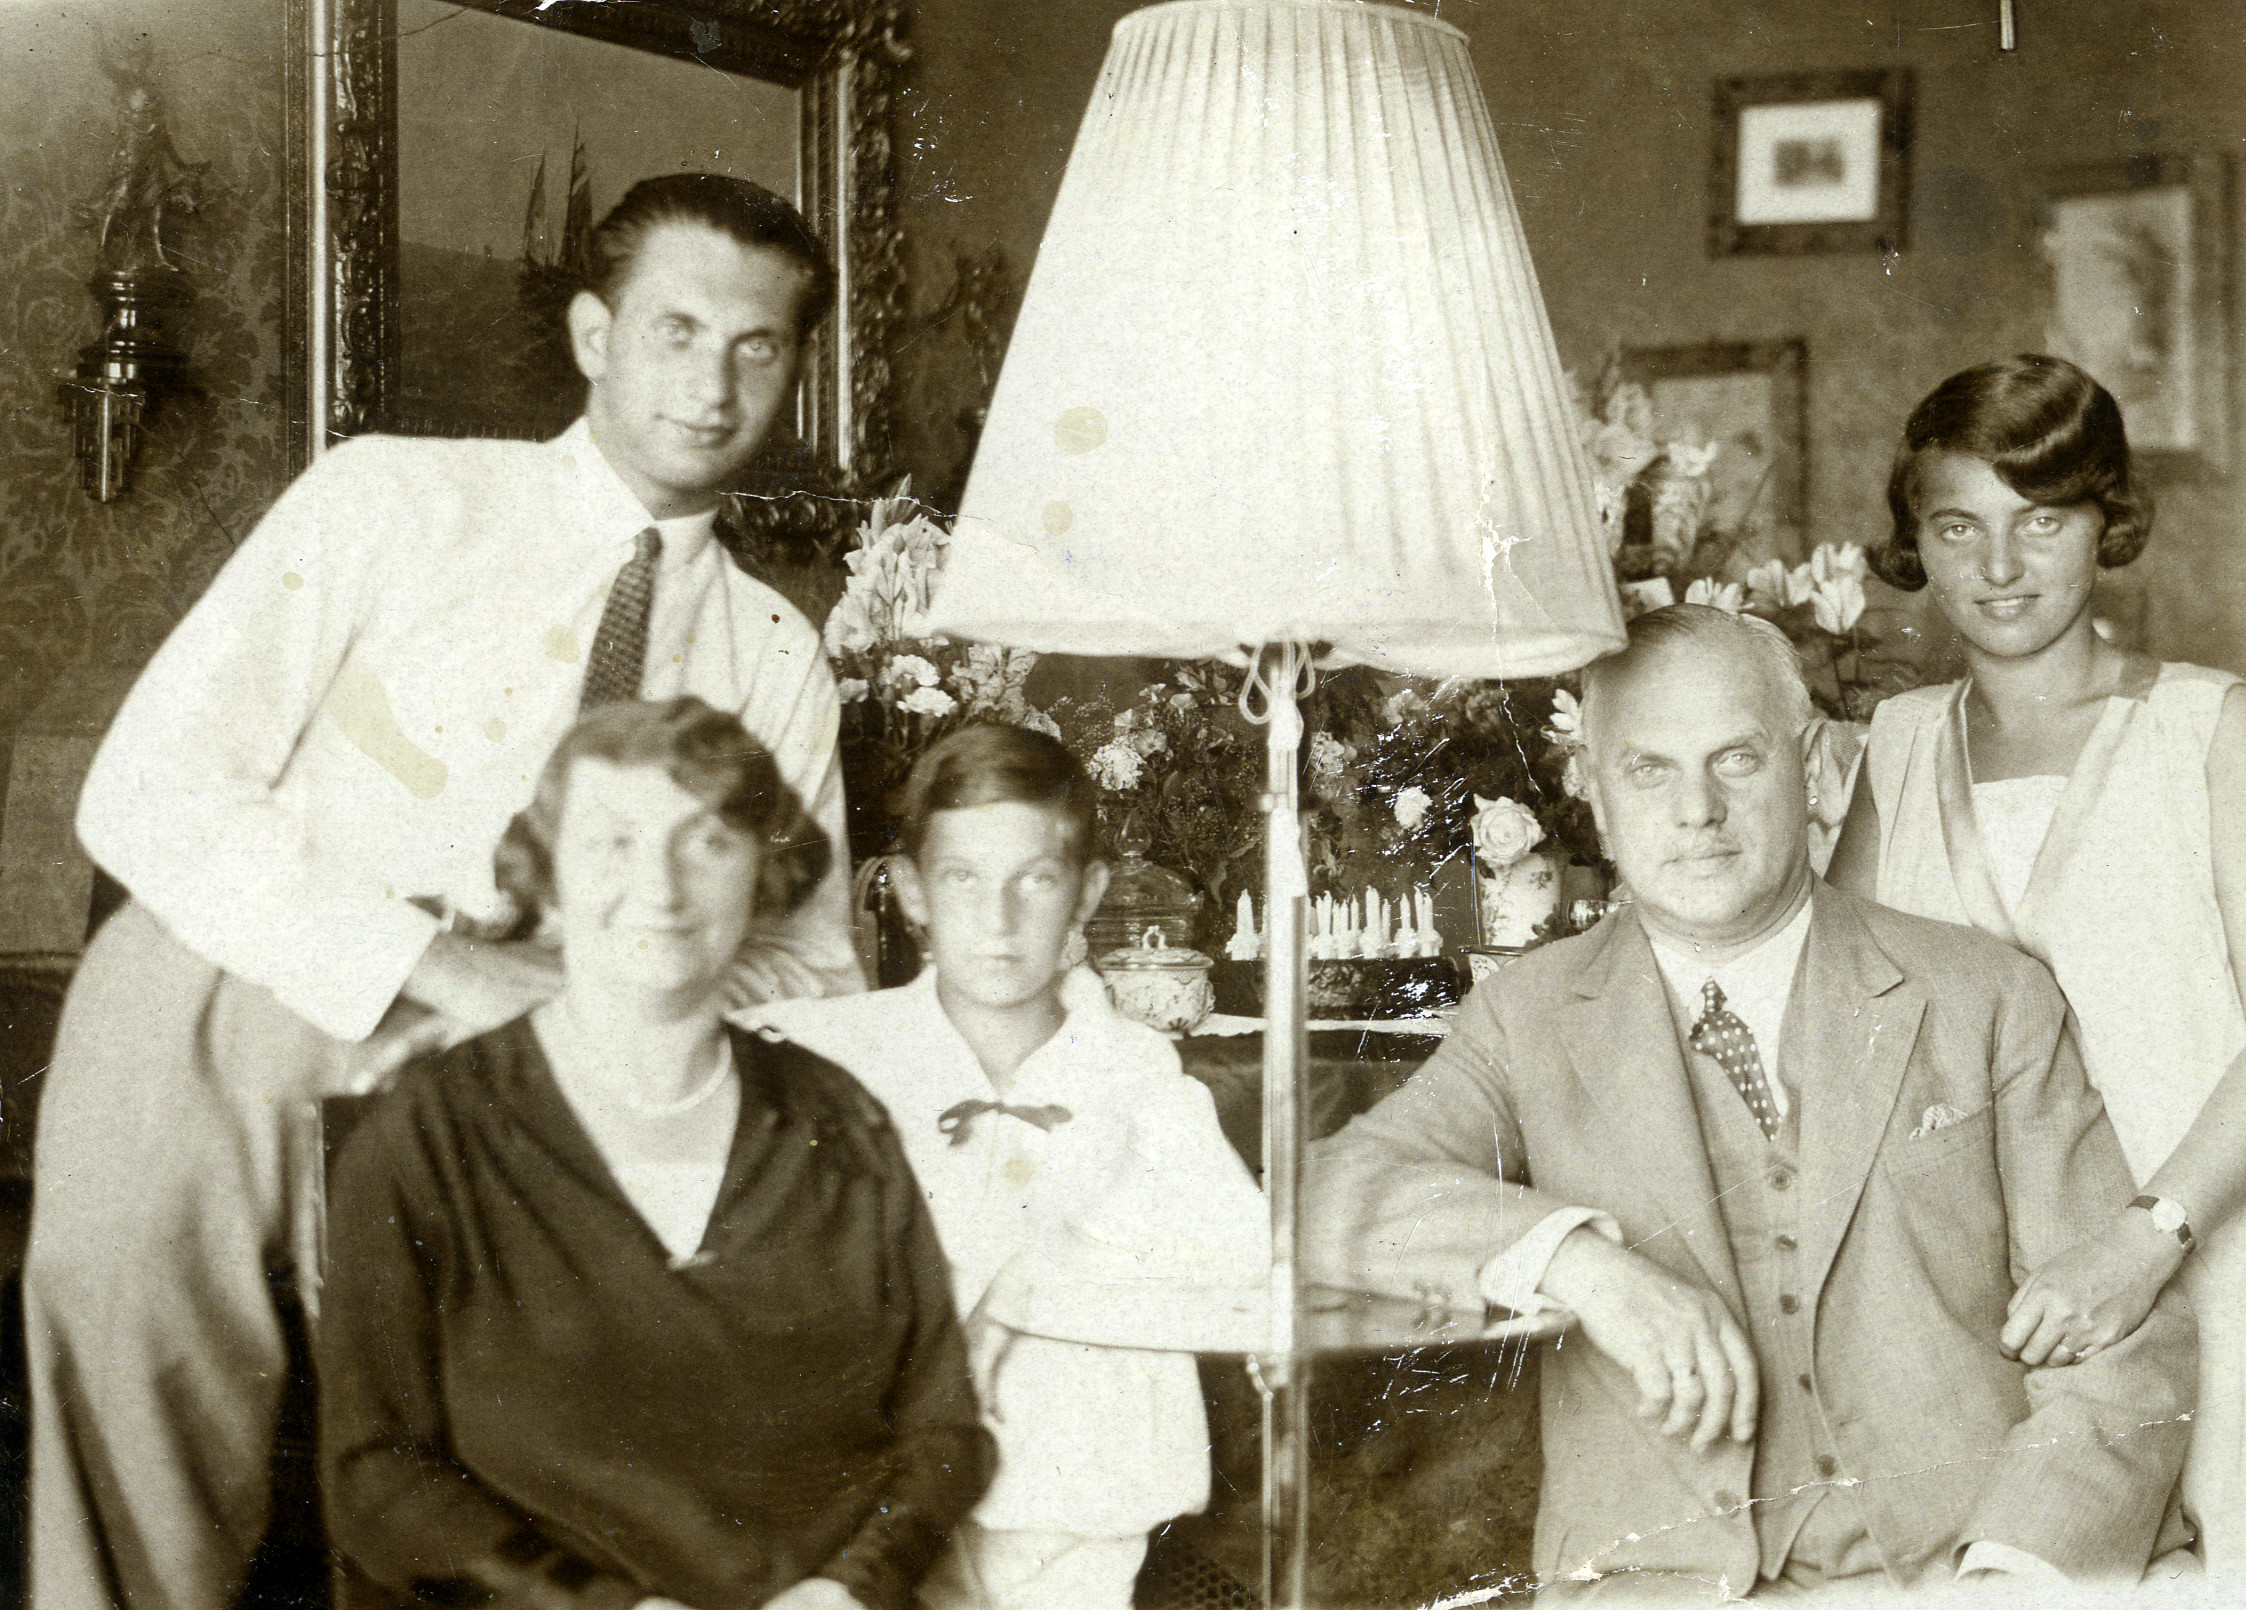 The Suss family in Vienna celebrates Hanukkah.

Pictured are parents Sidonie and Philip Suss, with their children Rudi, George, and Hedy (left to right).